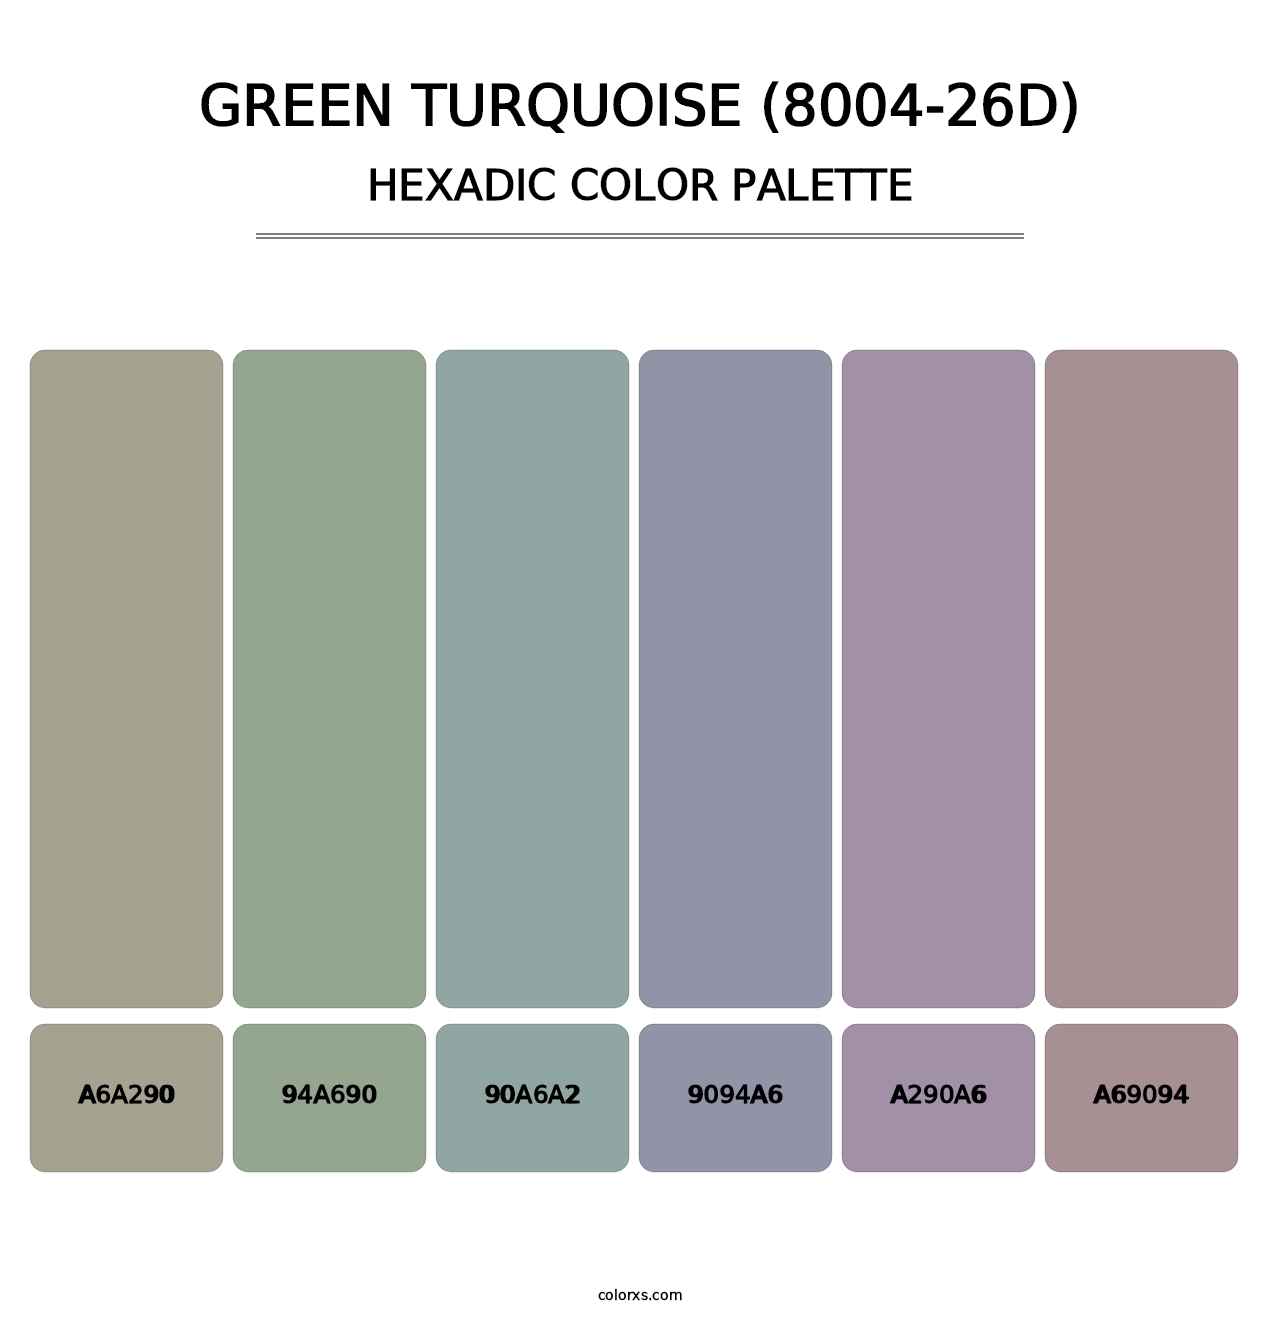 Green Turquoise (8004-26D) - Hexadic Color Palette